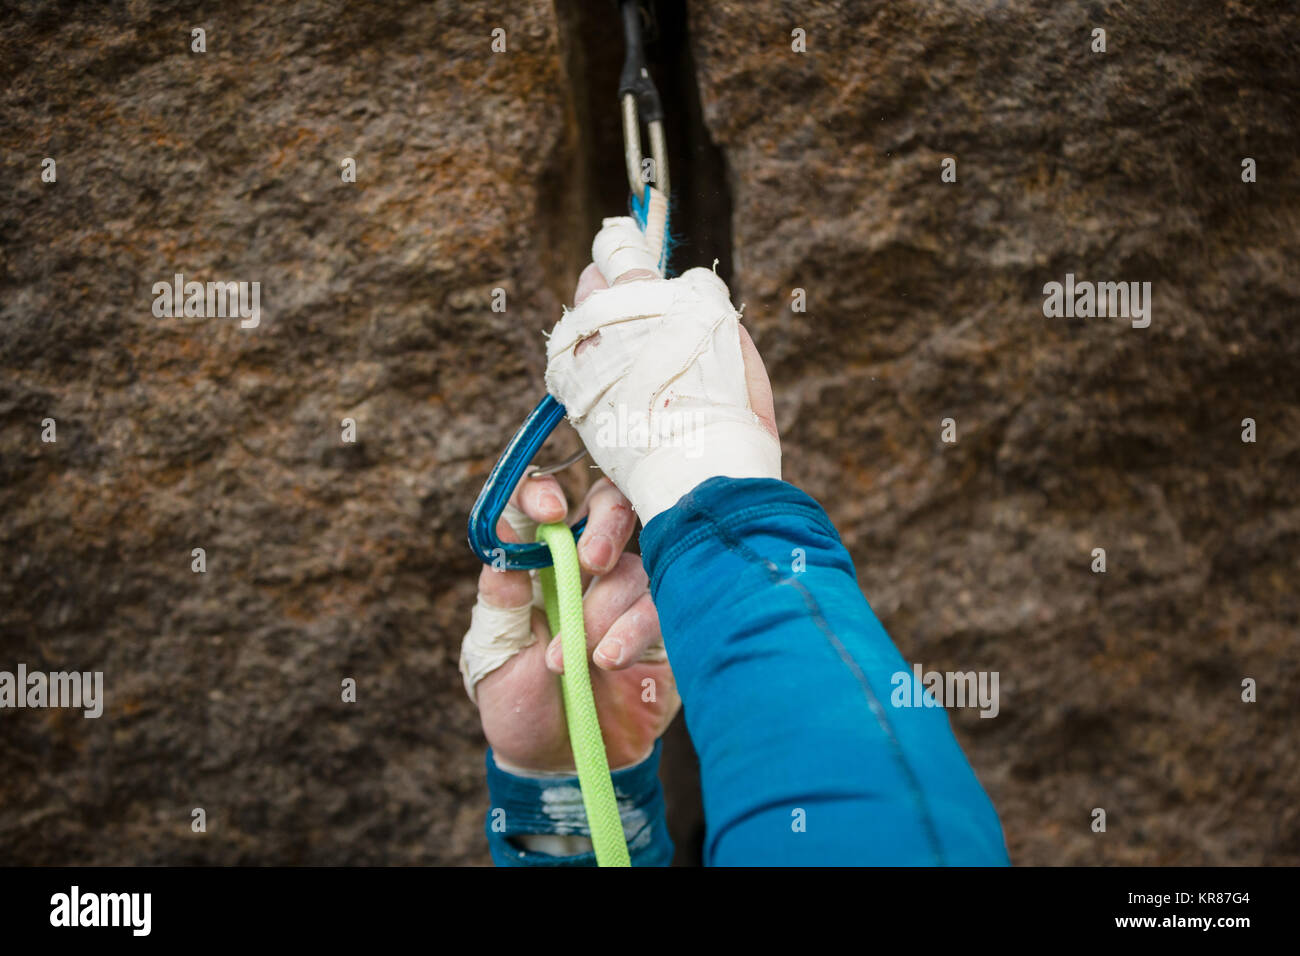 Detail of a man clipping in his rope to a quickdraw during a rock climb Stock Photo